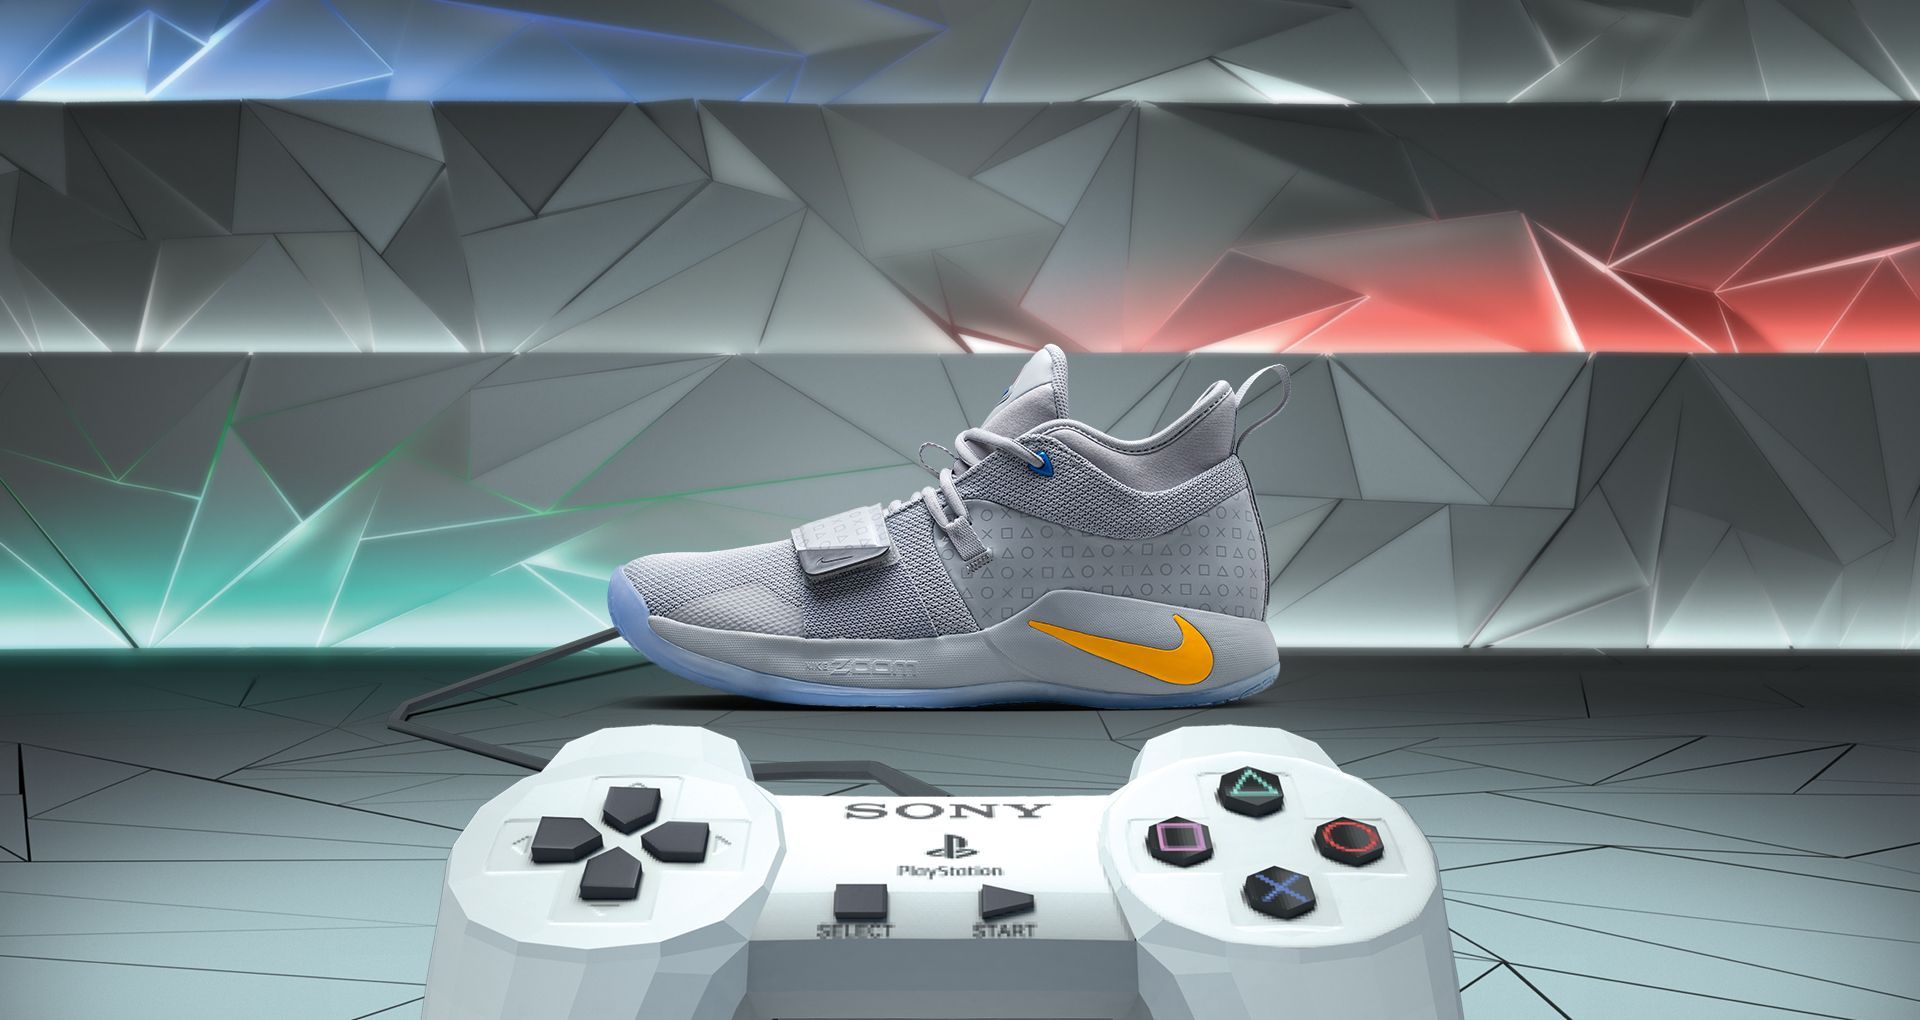  Nike Geile Hintergrundbild 1920x1020. PlayStation Colorway x Nike Sneakers Contain Hidden PS4 Easter Egg